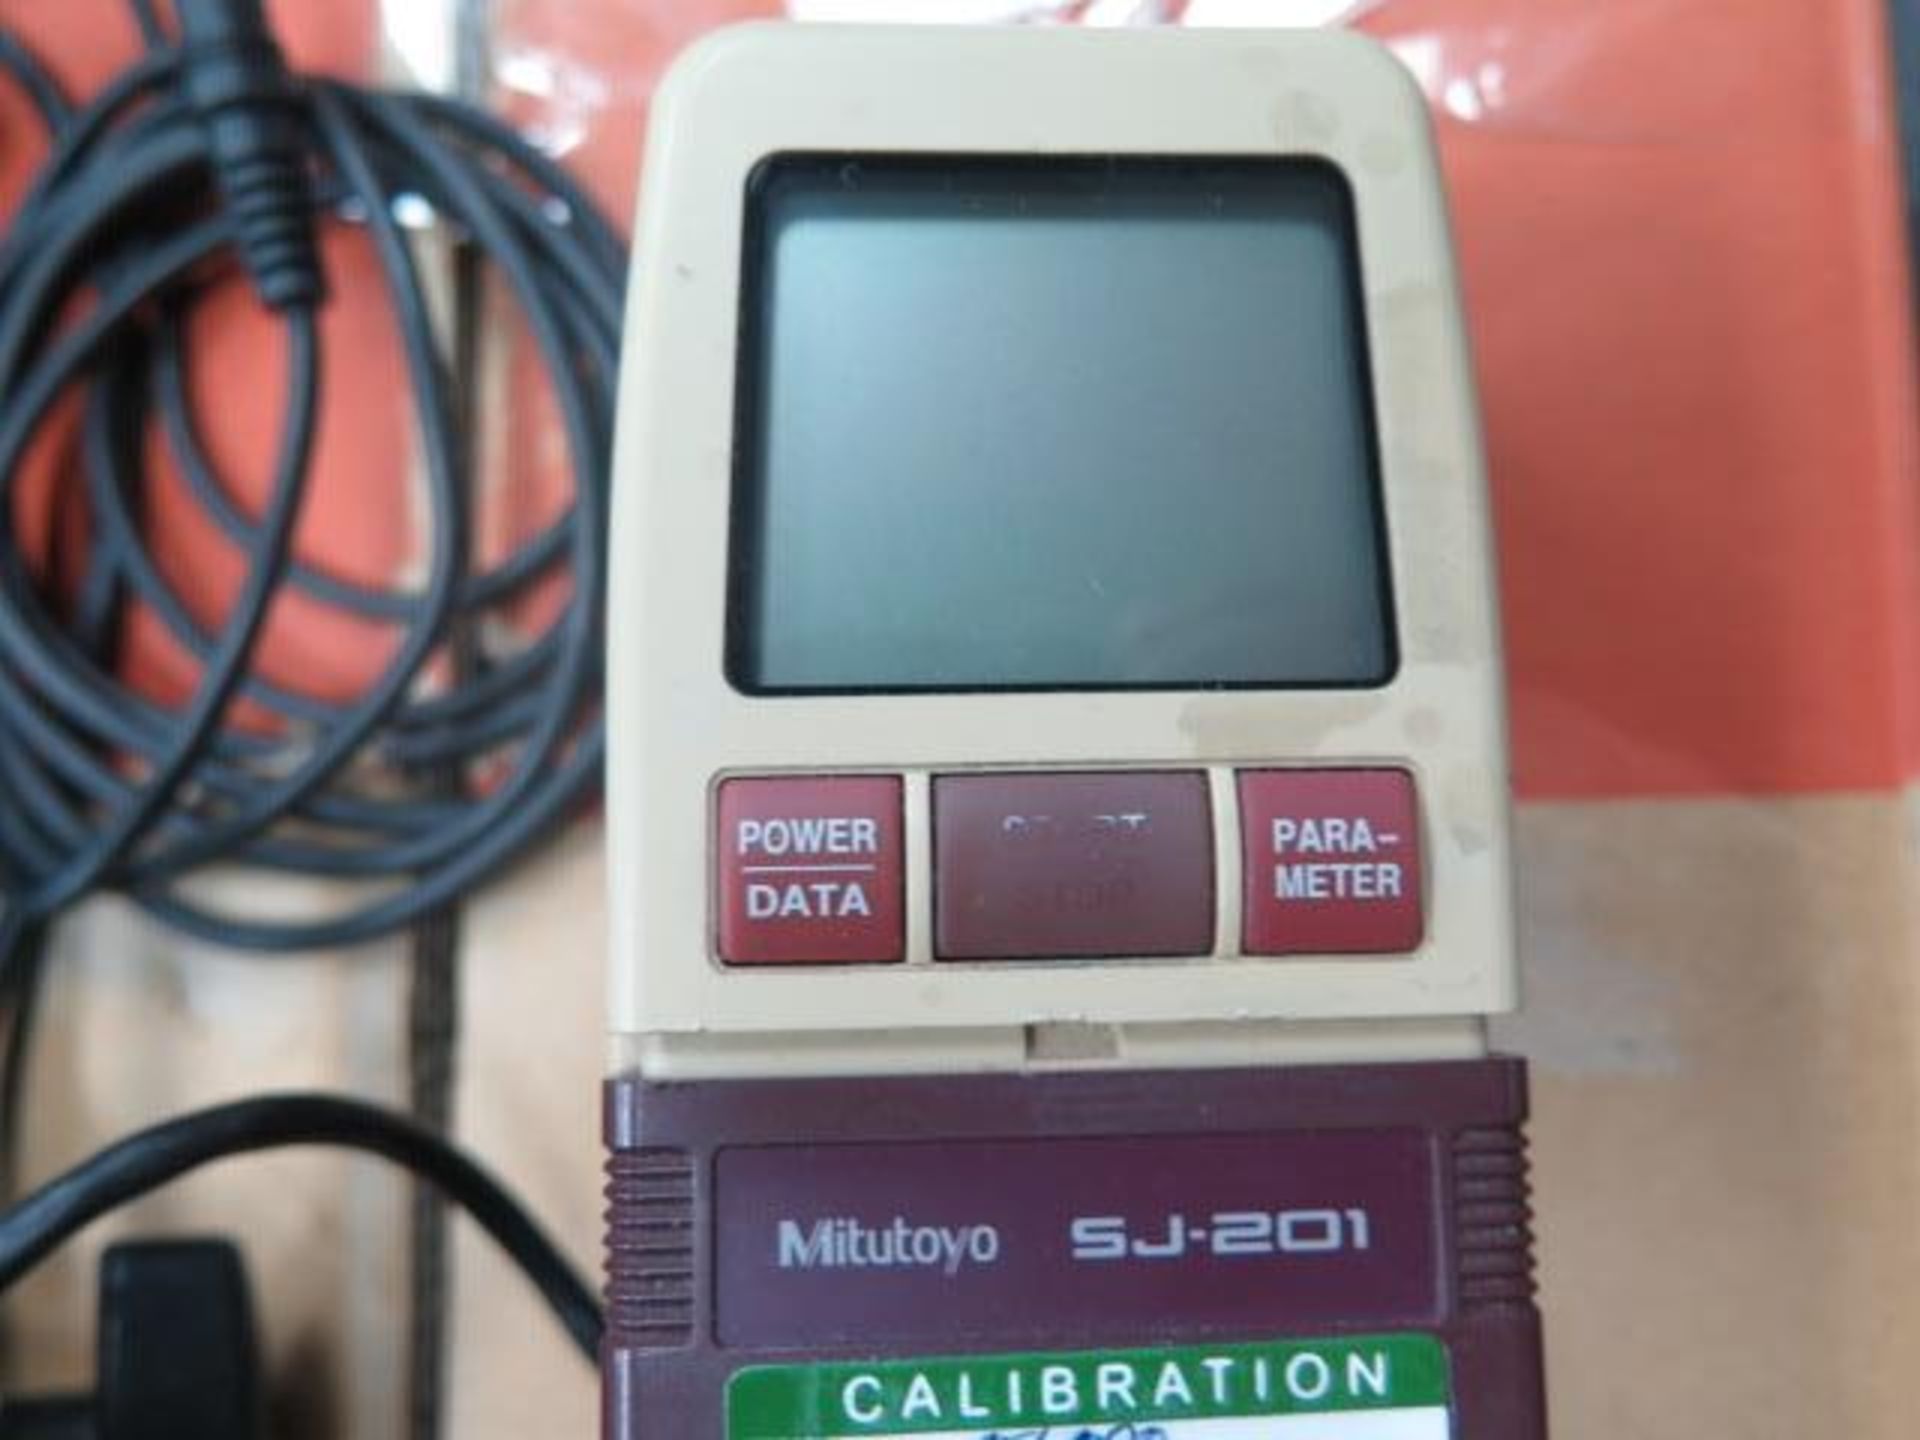 Mitutoyo SJ-201 Digital Surface Roughness Gage (SOLD AS-IS - NO WARRANTY) - Image 6 of 6